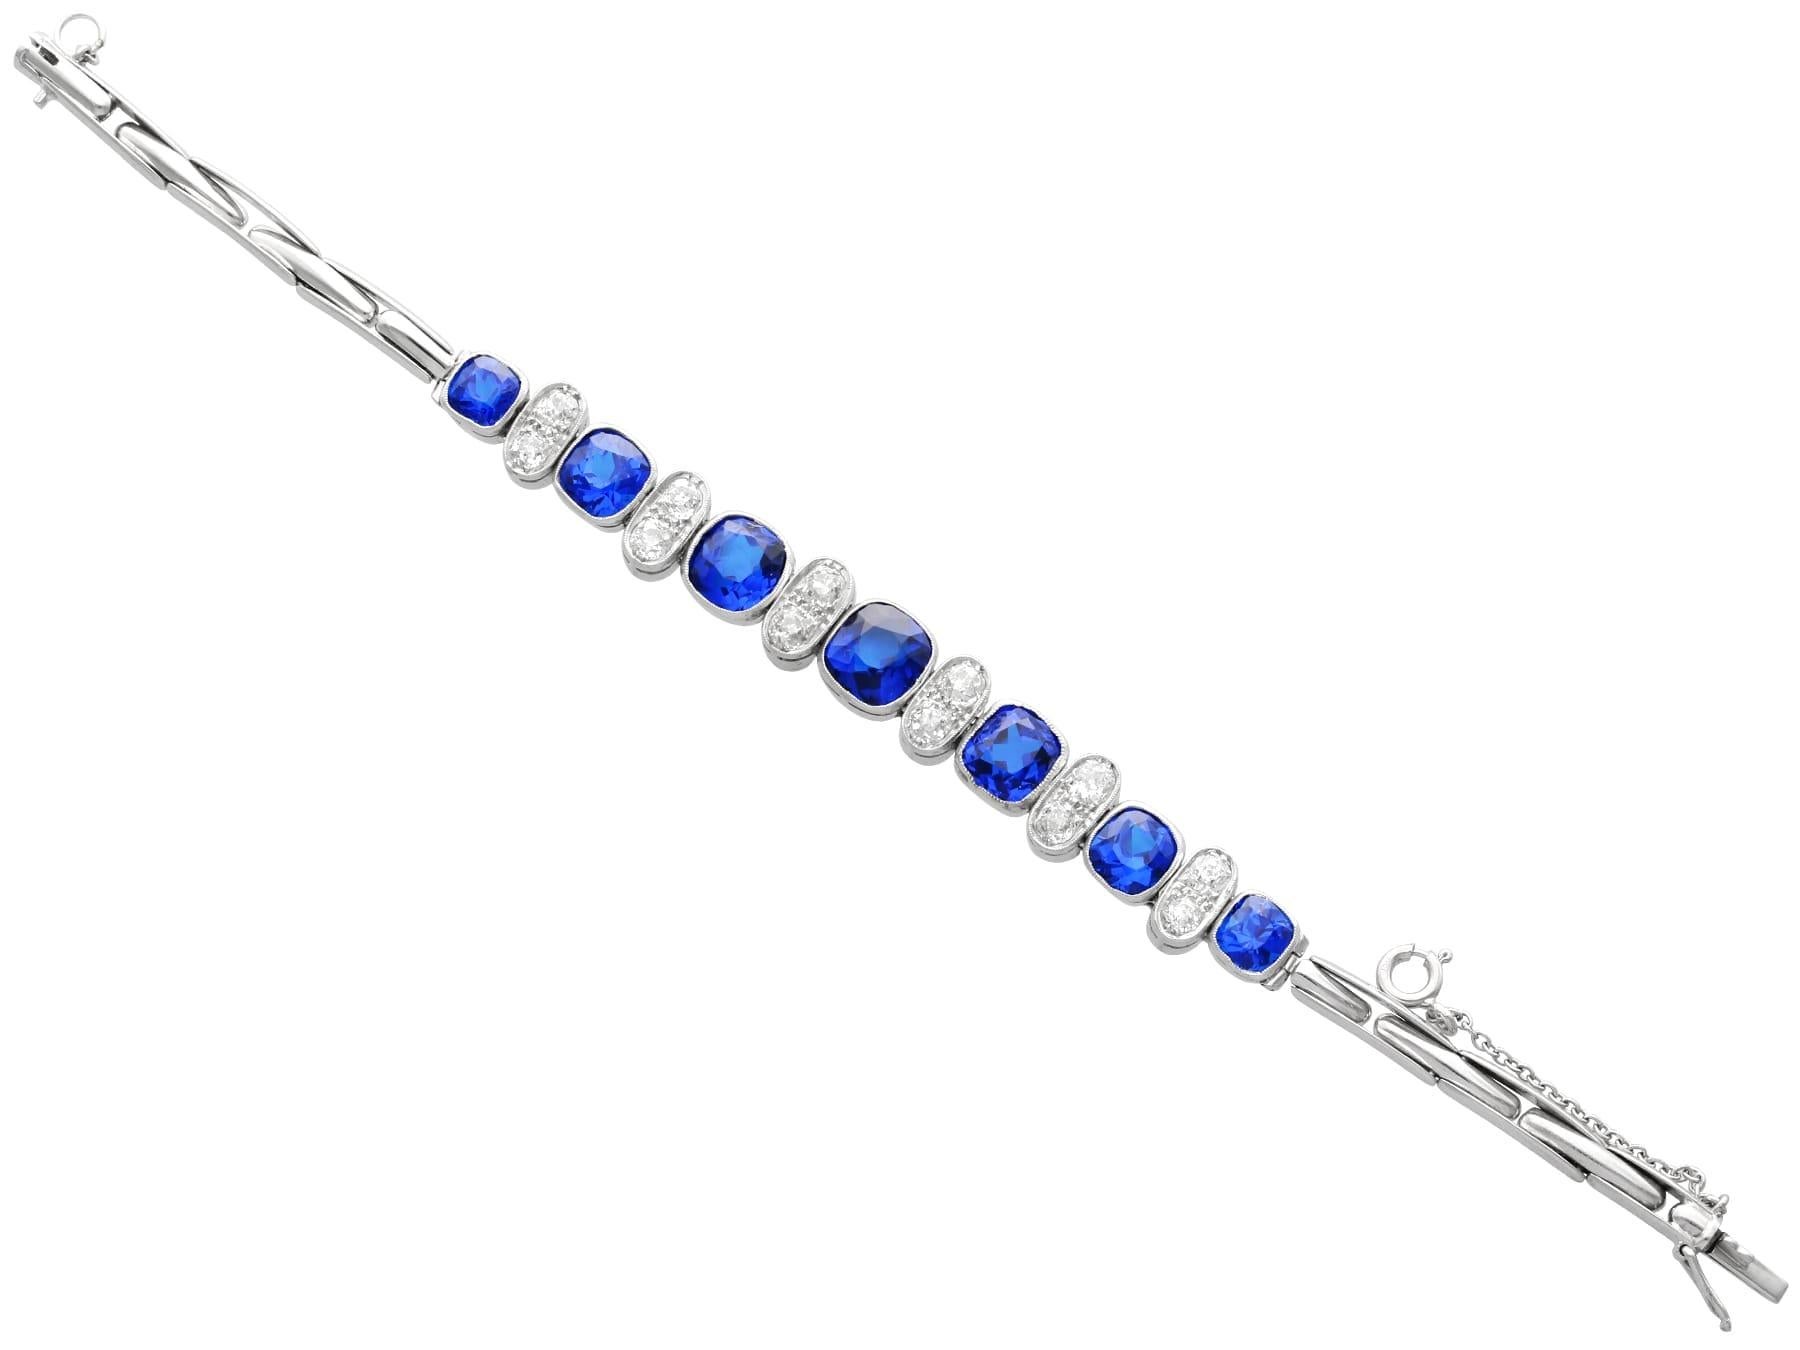 1900s Synthetic Blue Spinel and 2.04 Carat Diamond White Gold Bracelet For Sale 1